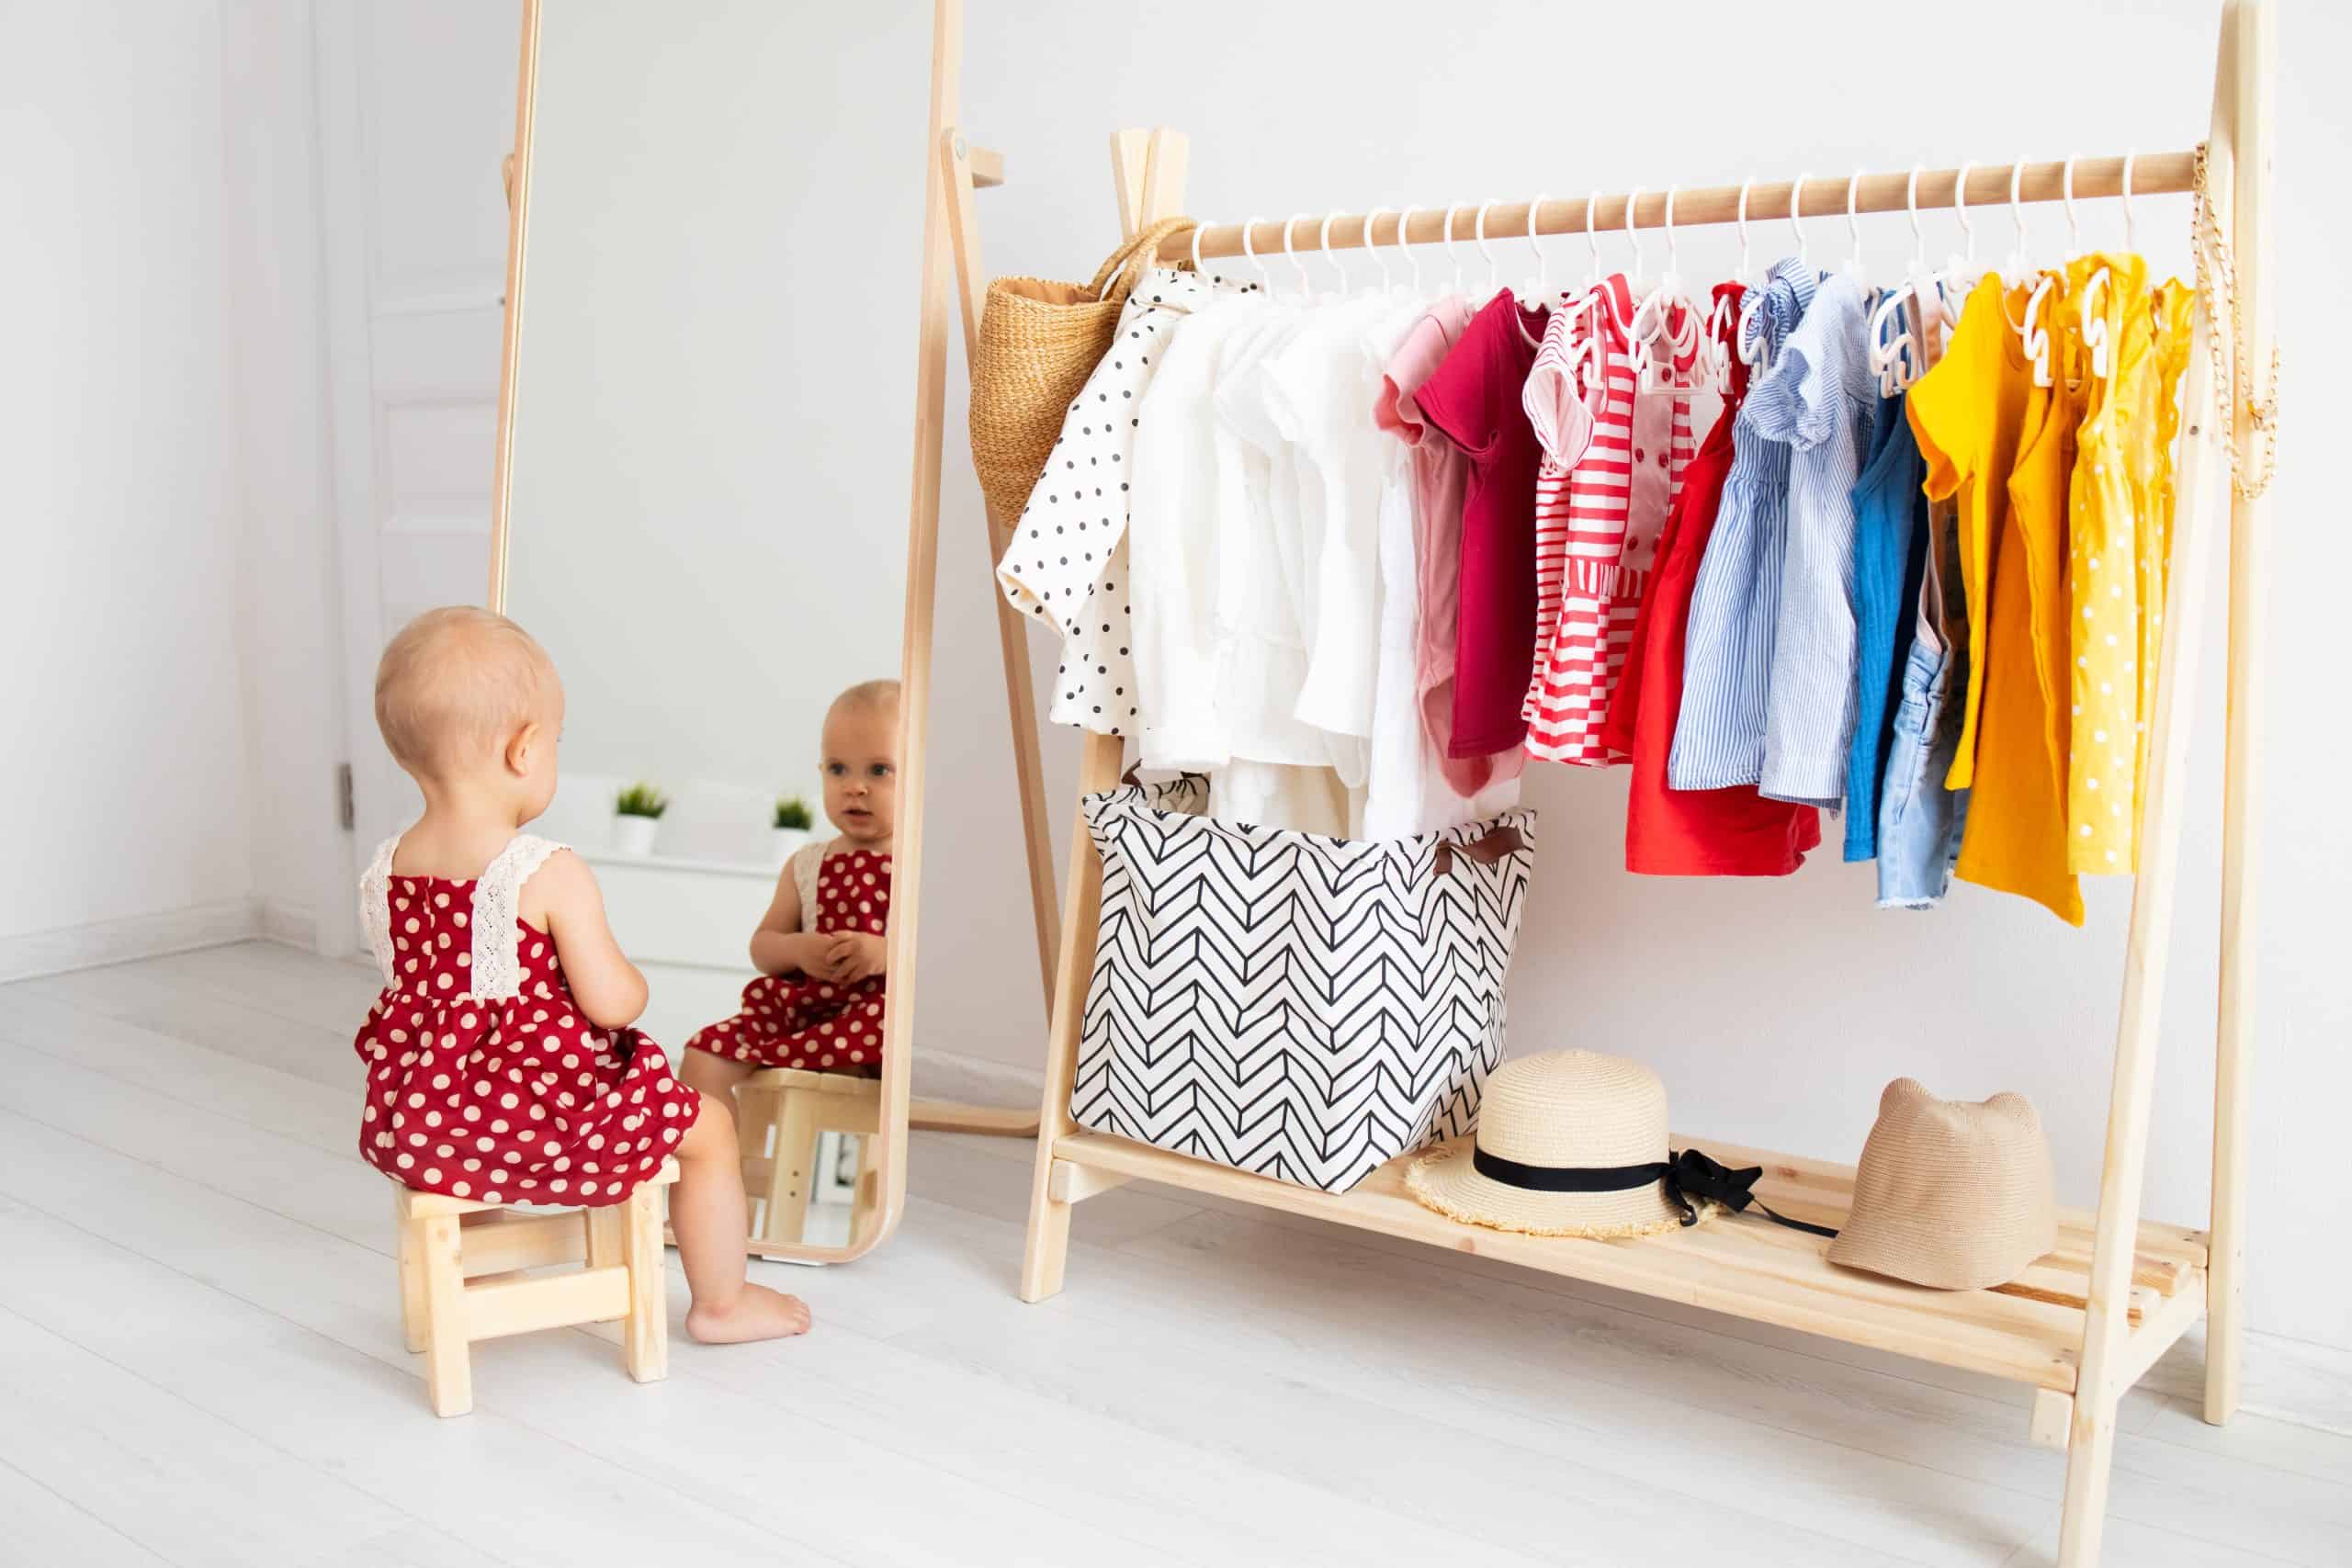 How to Organize Baby's Clothes? Secrets New Moms Should Know Now